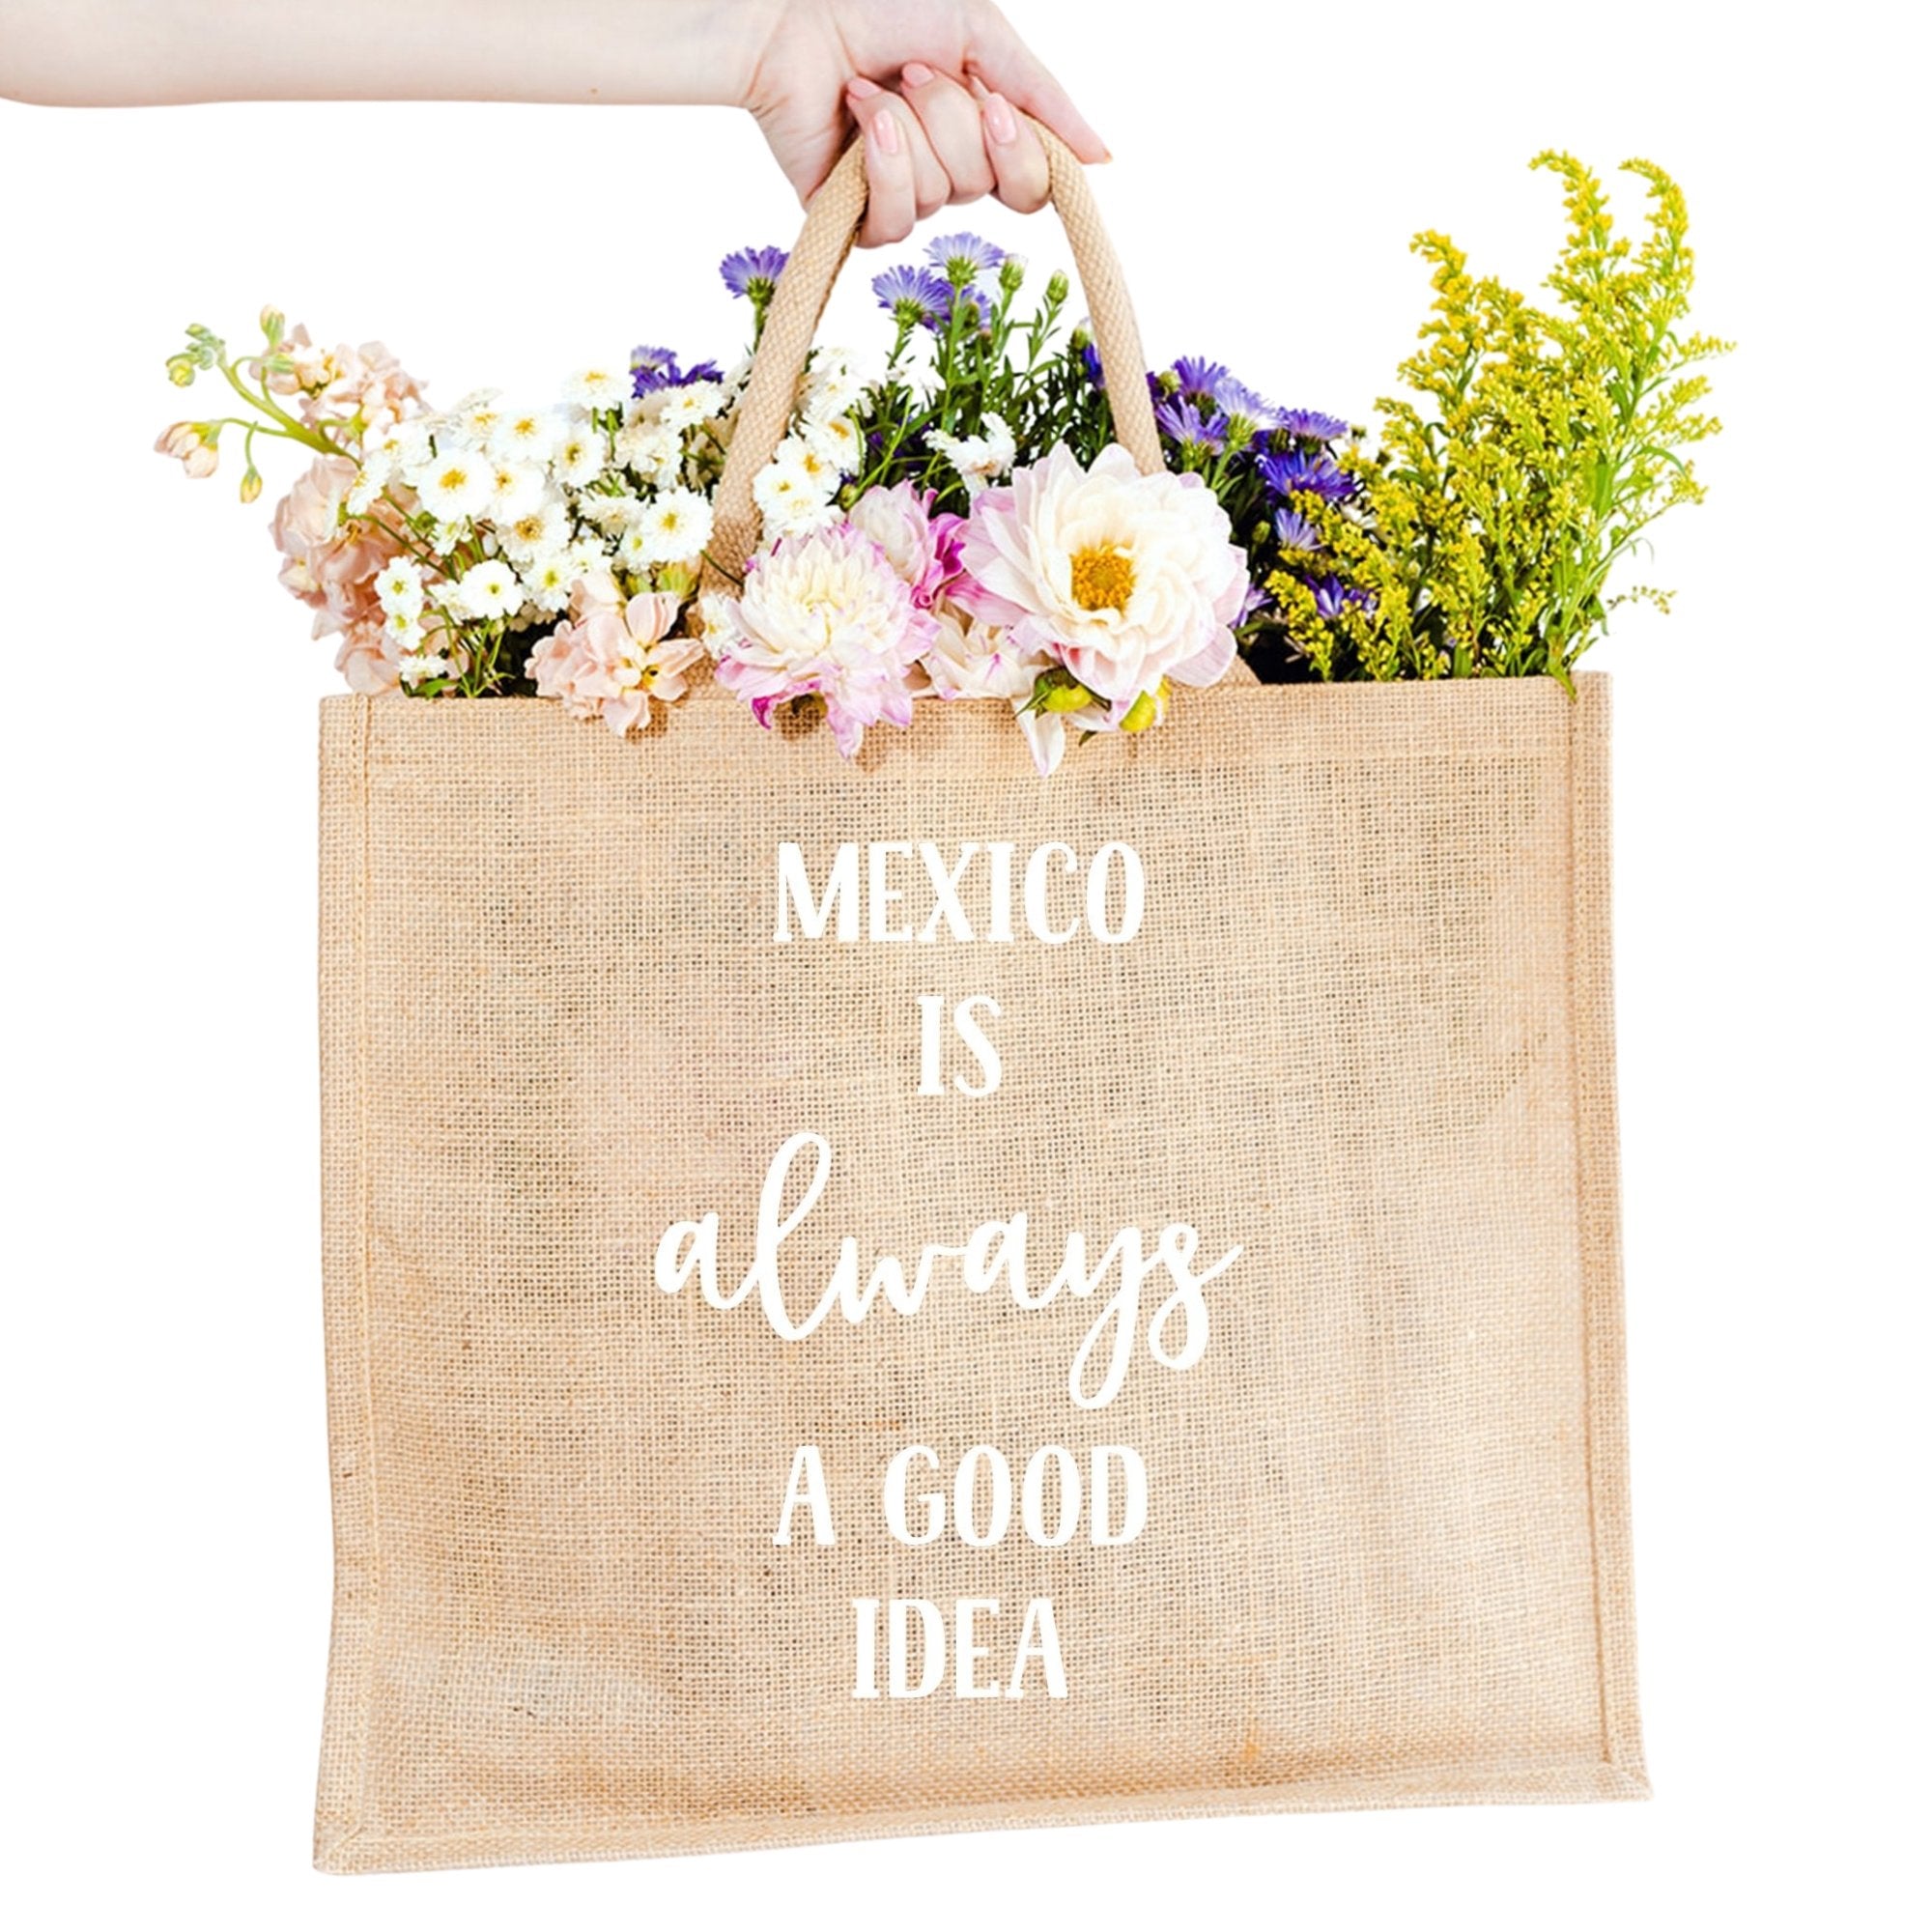 A custom jute bag reads "Mexico Is Always A Good Idea" on the front